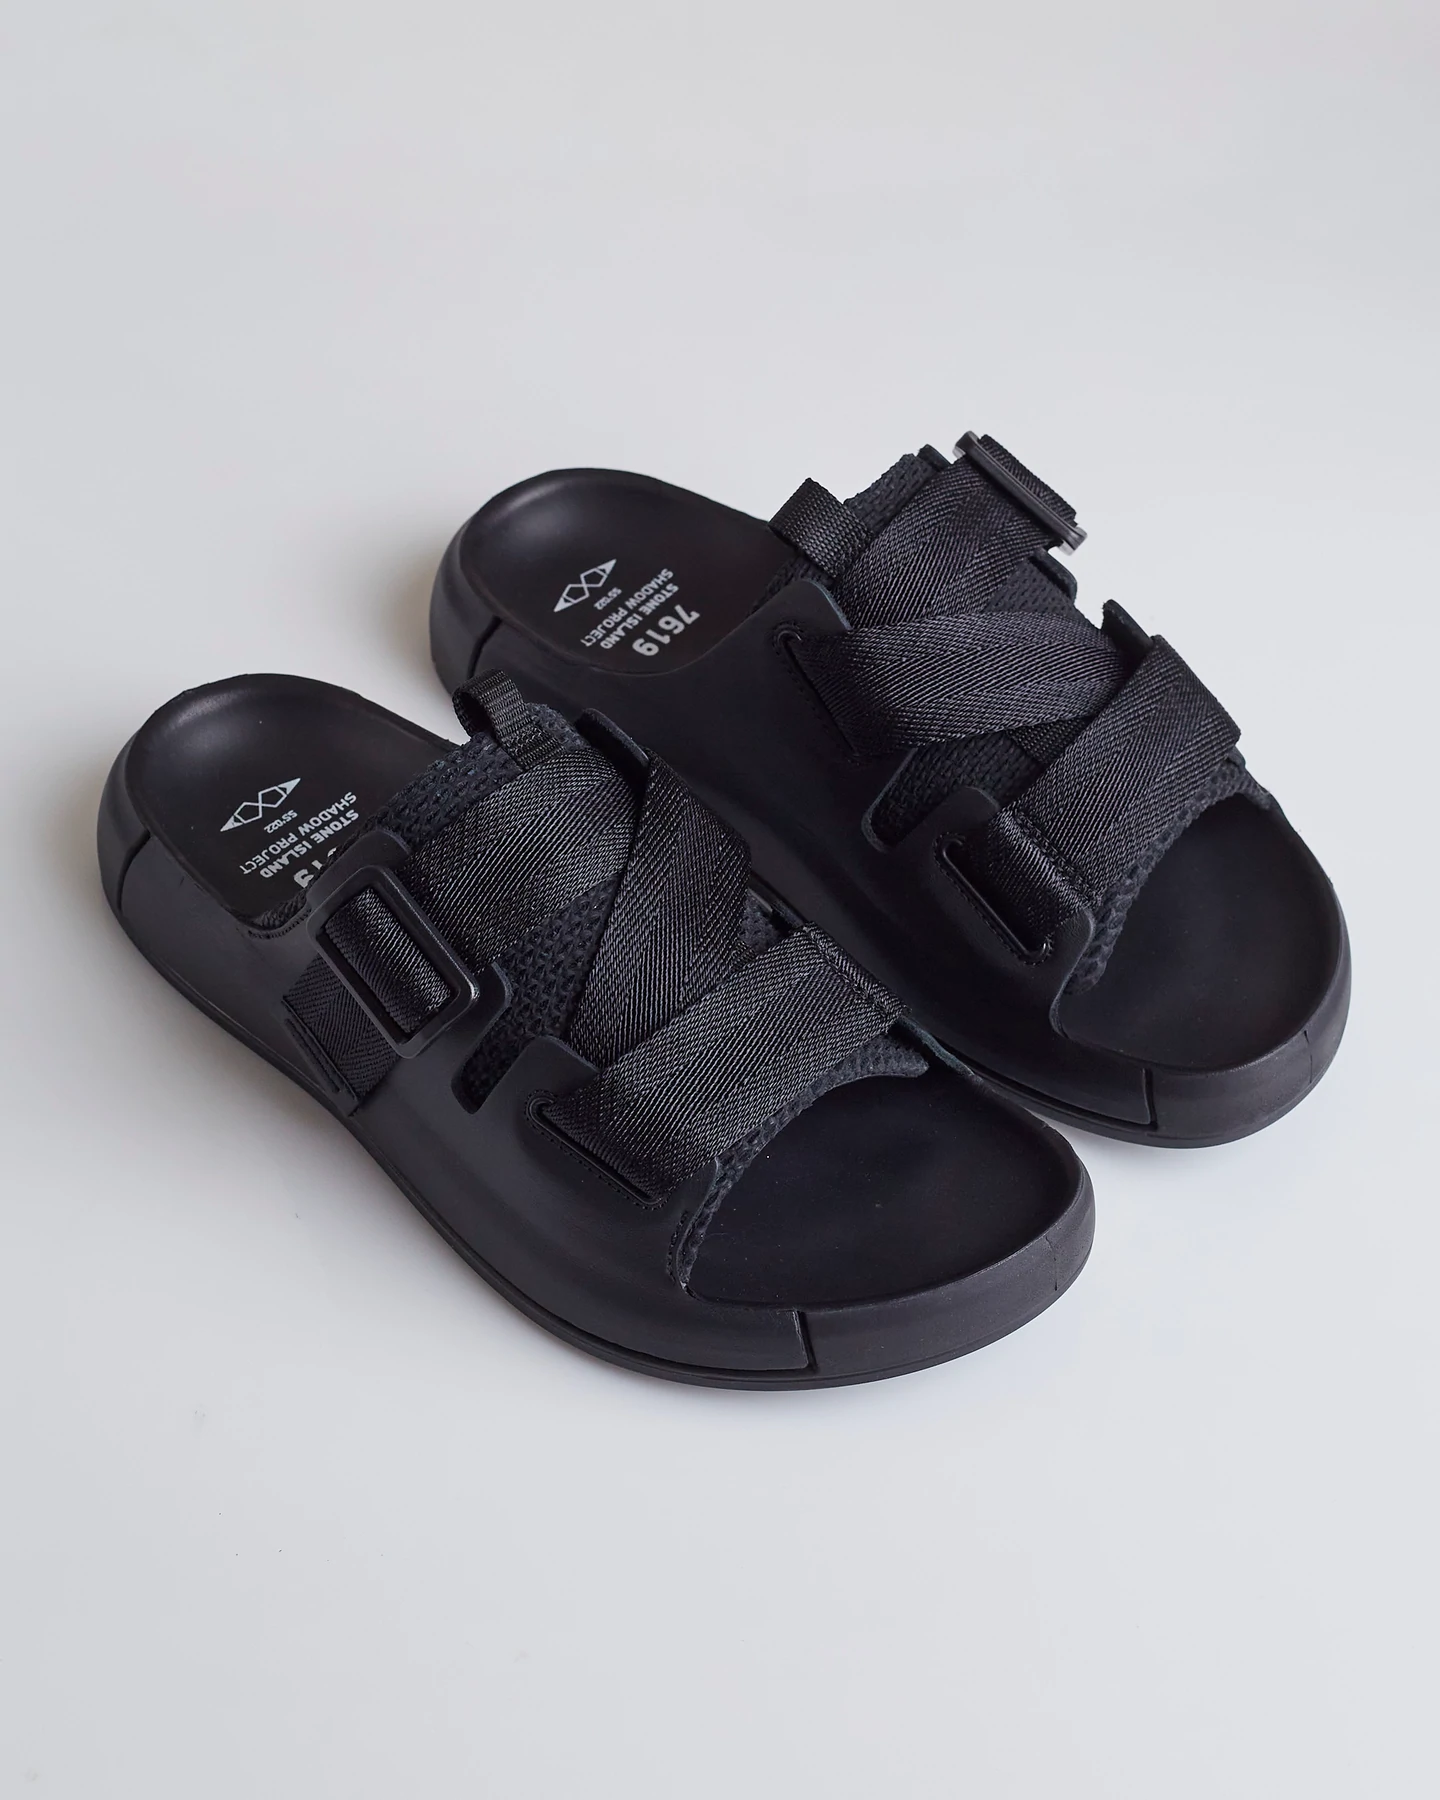 Now Available: Stone Island Shadow Project Sandal 